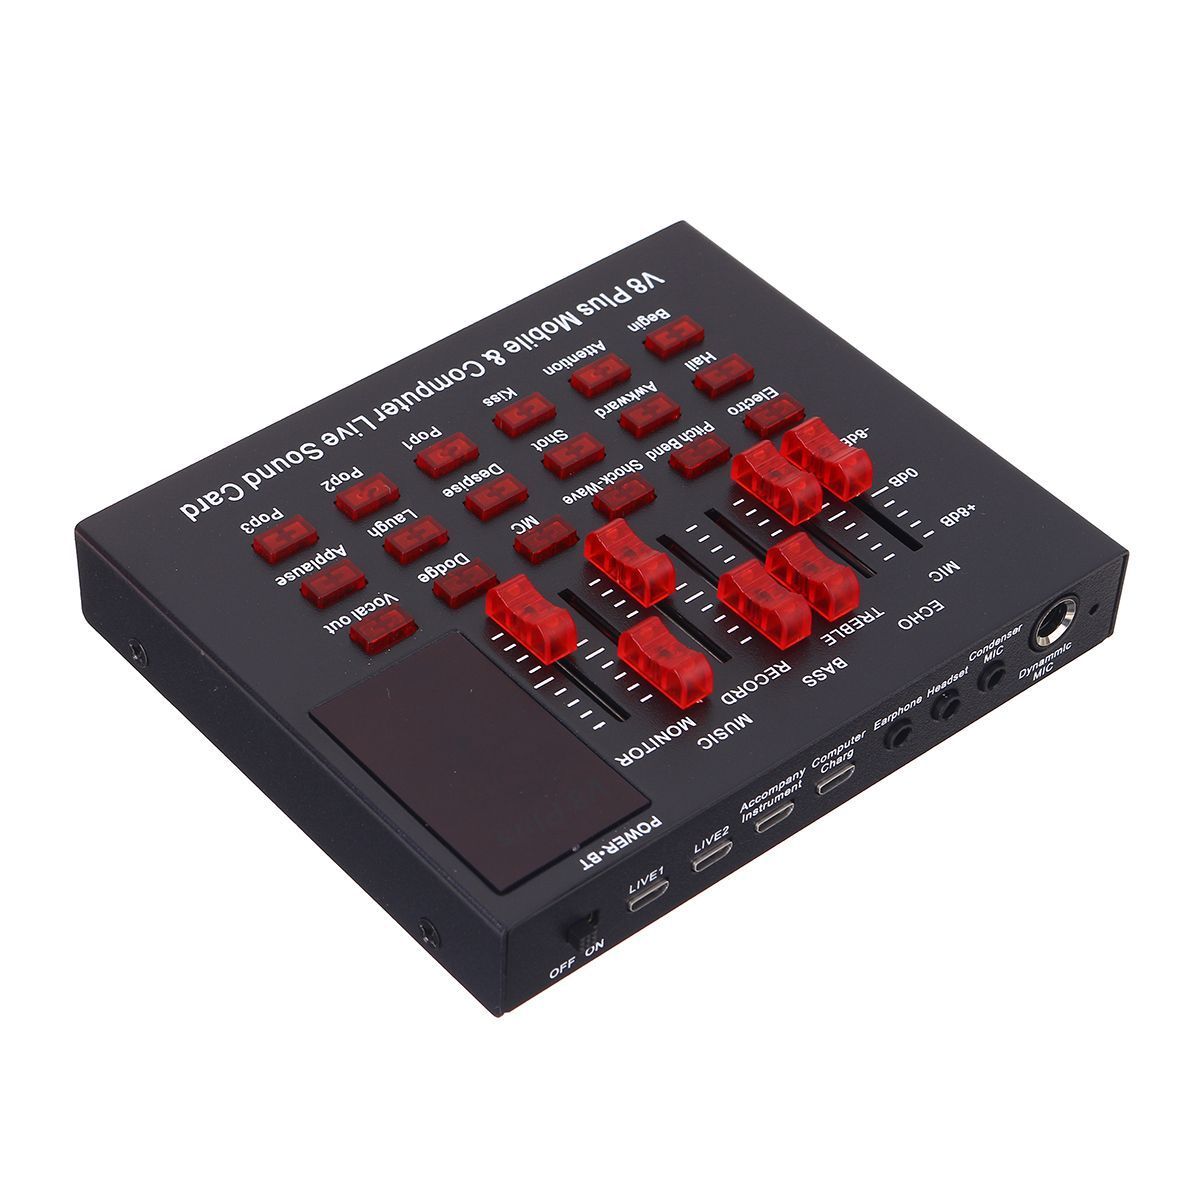 V8-PLUS-Dual-Channel-18-Sound-Effects-Live-Sound-Card-Support-Multifunctional-Equalizer-DSP-Noise-Re-1718550